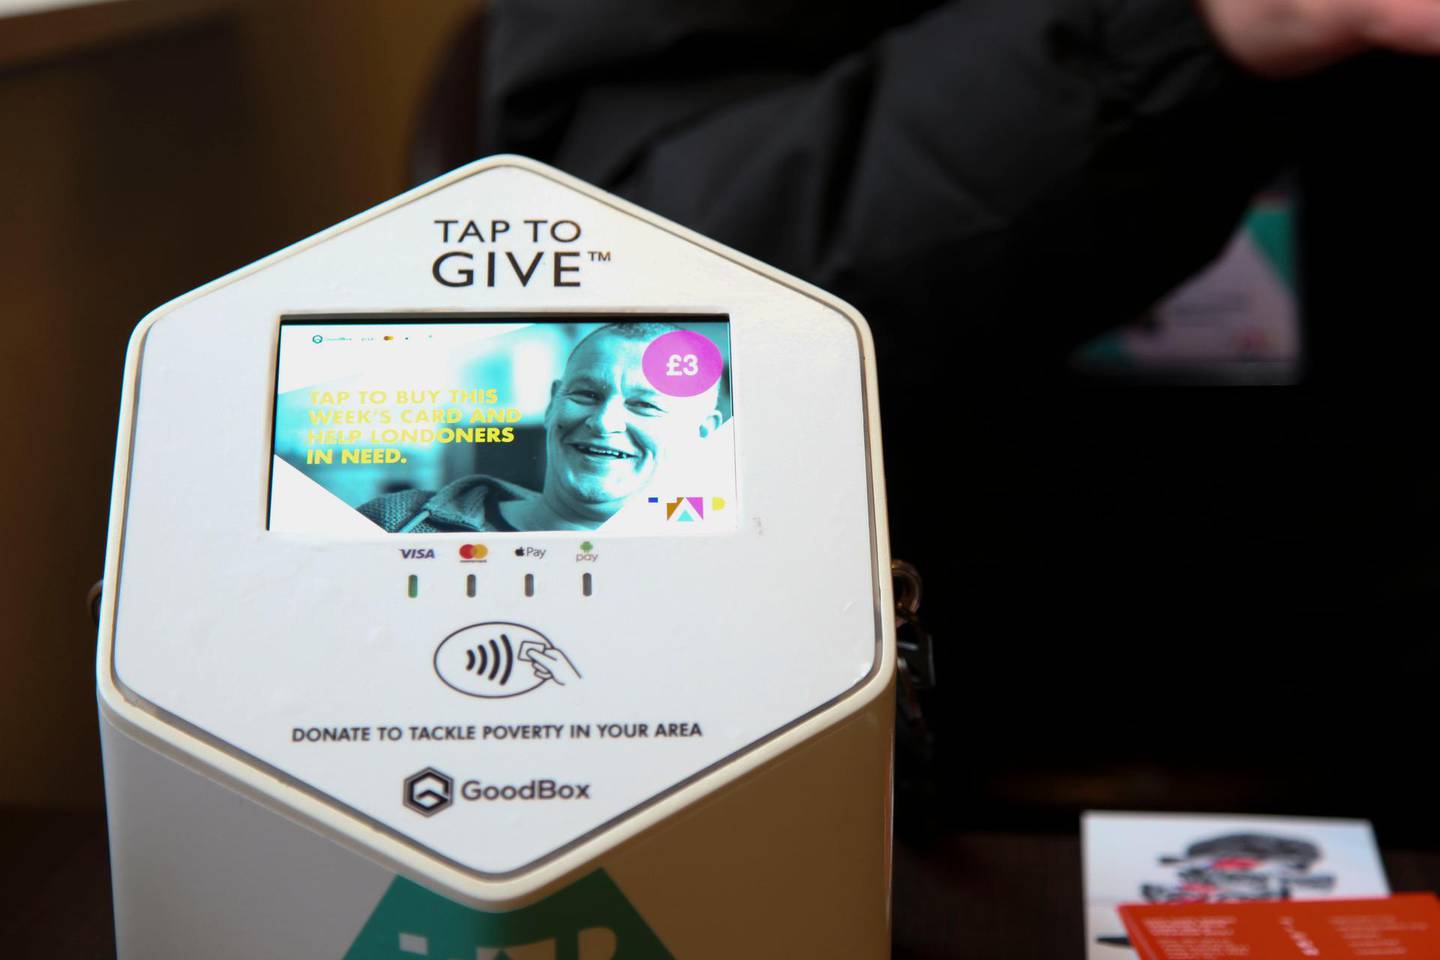 The contactless payment machine used by TAP London vendors to take donations for homeless people in London United Kingdom on January 4, 2018. Thomson Reuters Foundation / Cormac O'Brien